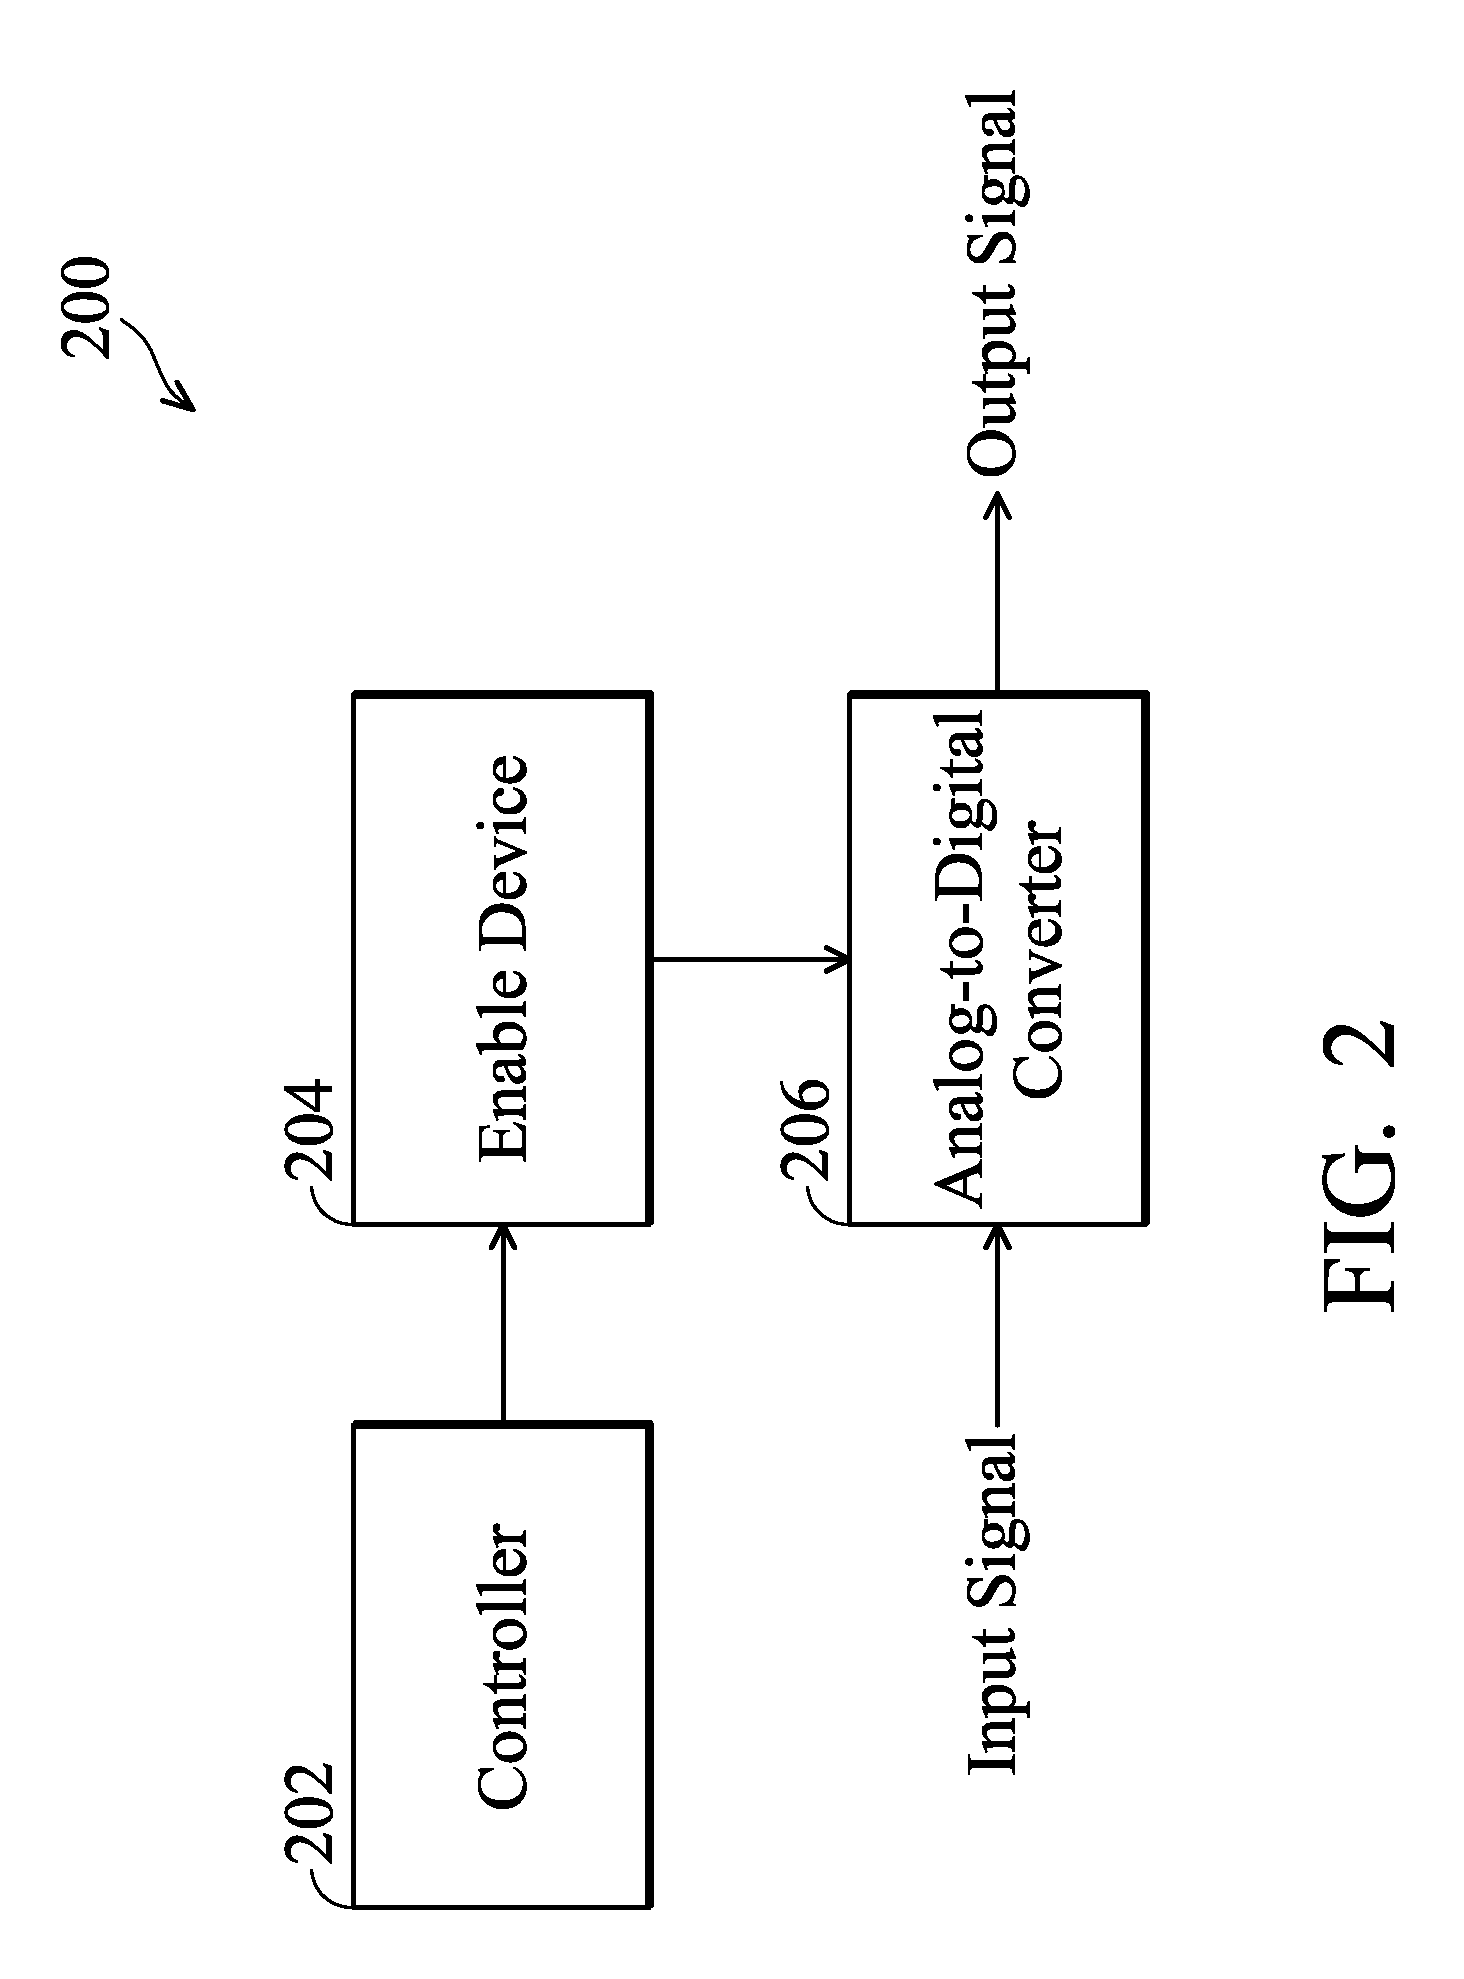 Electronic apparatus with adjustable power consumption